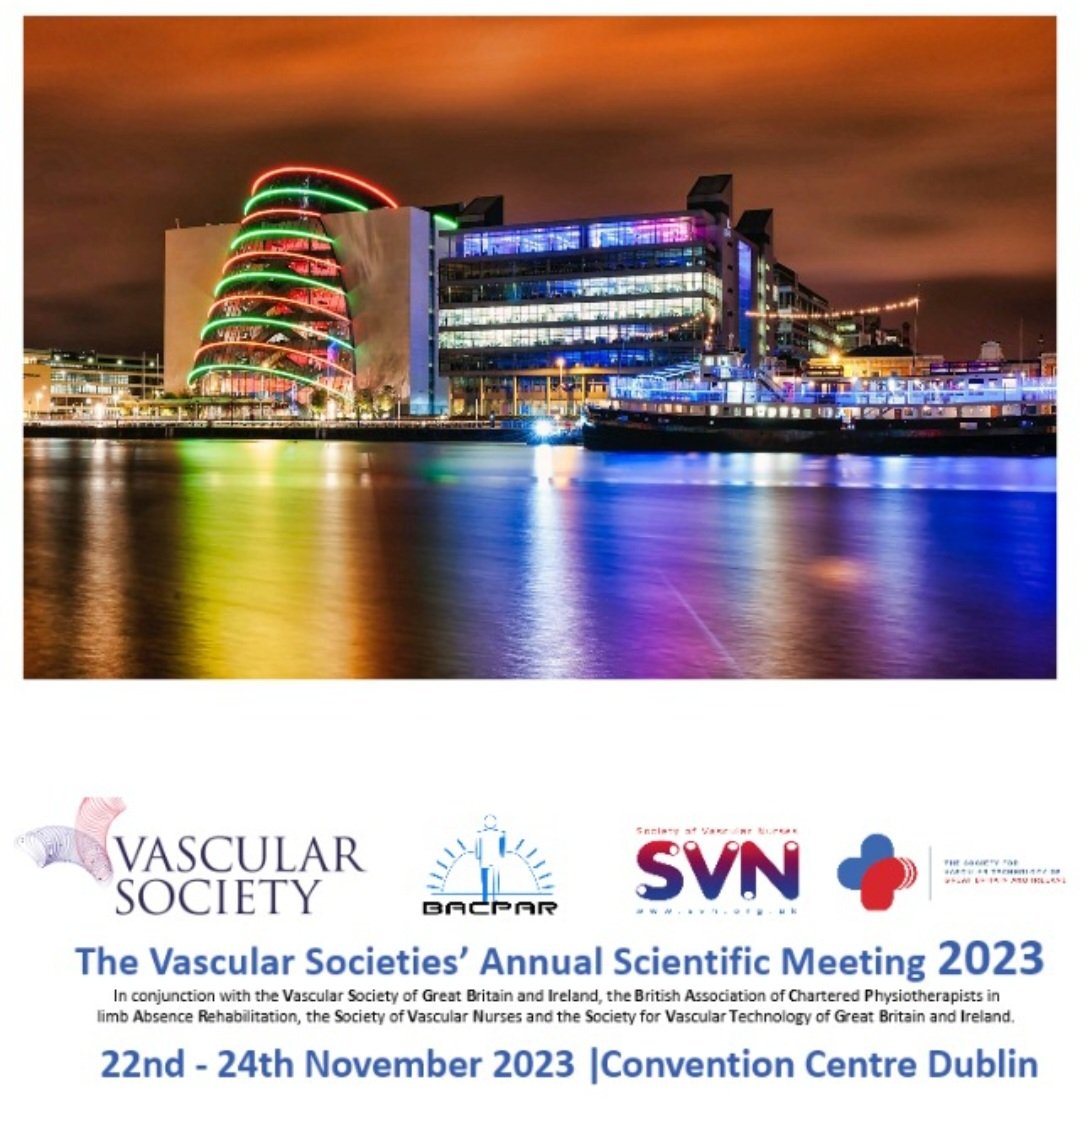 Thanks to @VSGBI @vascularnurses @BACPAR_official @svtgbi for an absolutely fabulous conference. I think Dublin will definitely be one of the most memorable ASMs for many reasons. And now, I shall curl up in bed and sleep for a week.